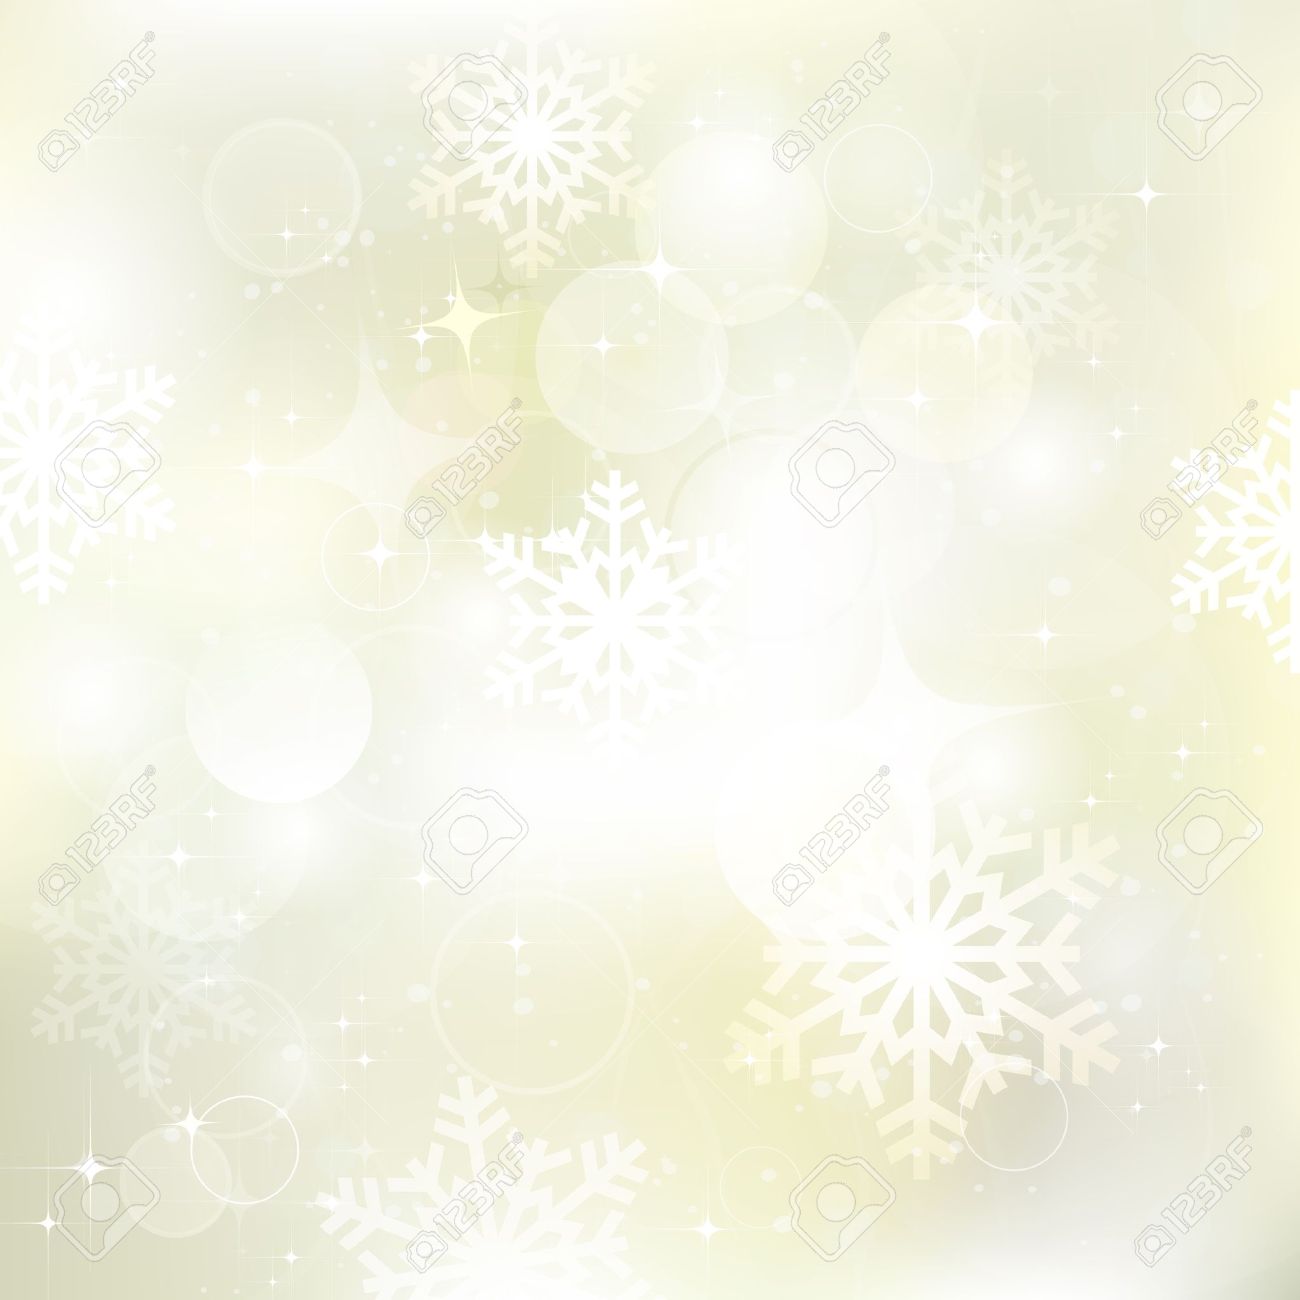 Chritmas gold background clipart 